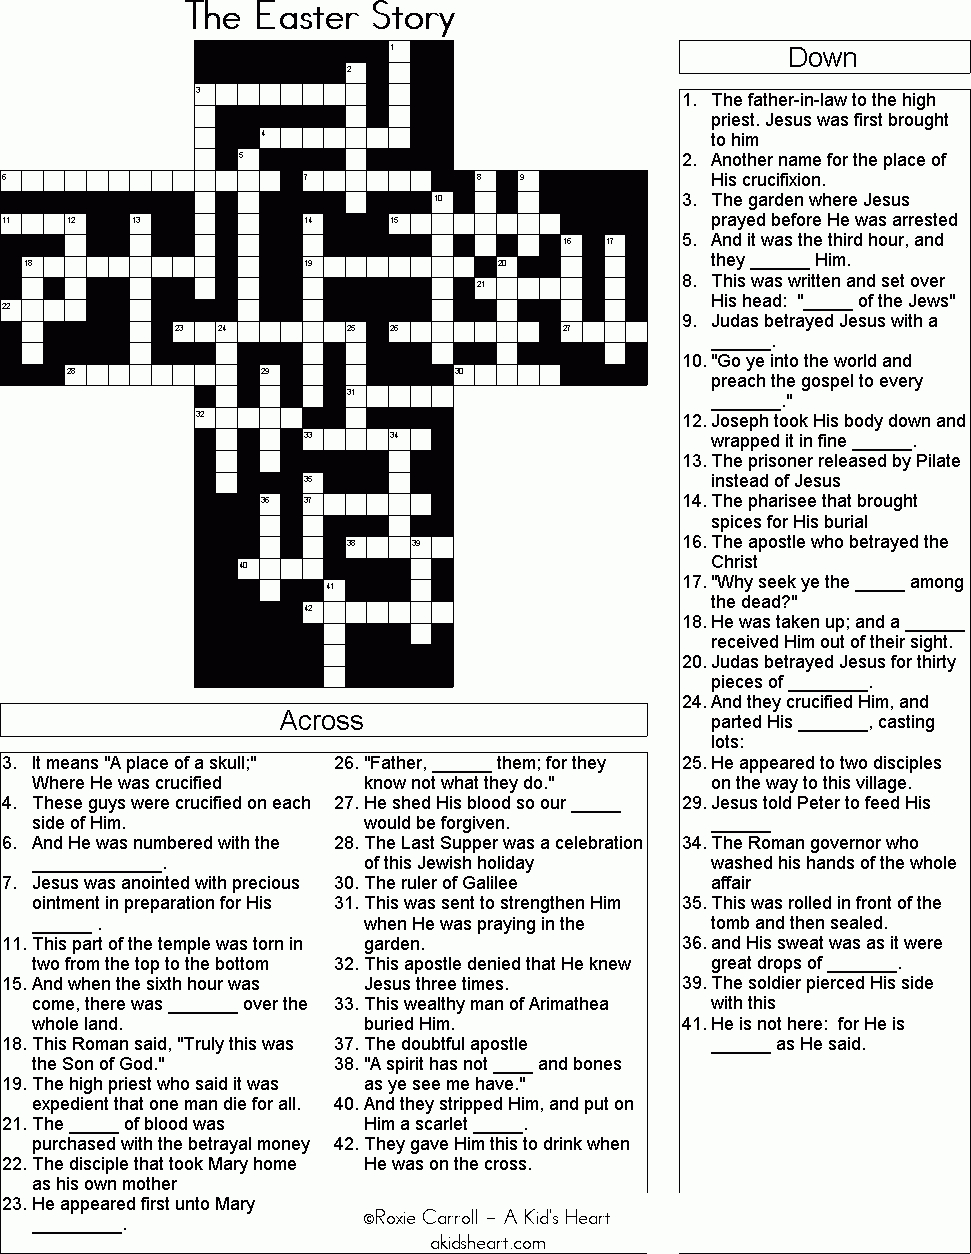 The Easter Story Crossword Puzzle | Bible Crosswords/word Search - Printable Bible Puzzles